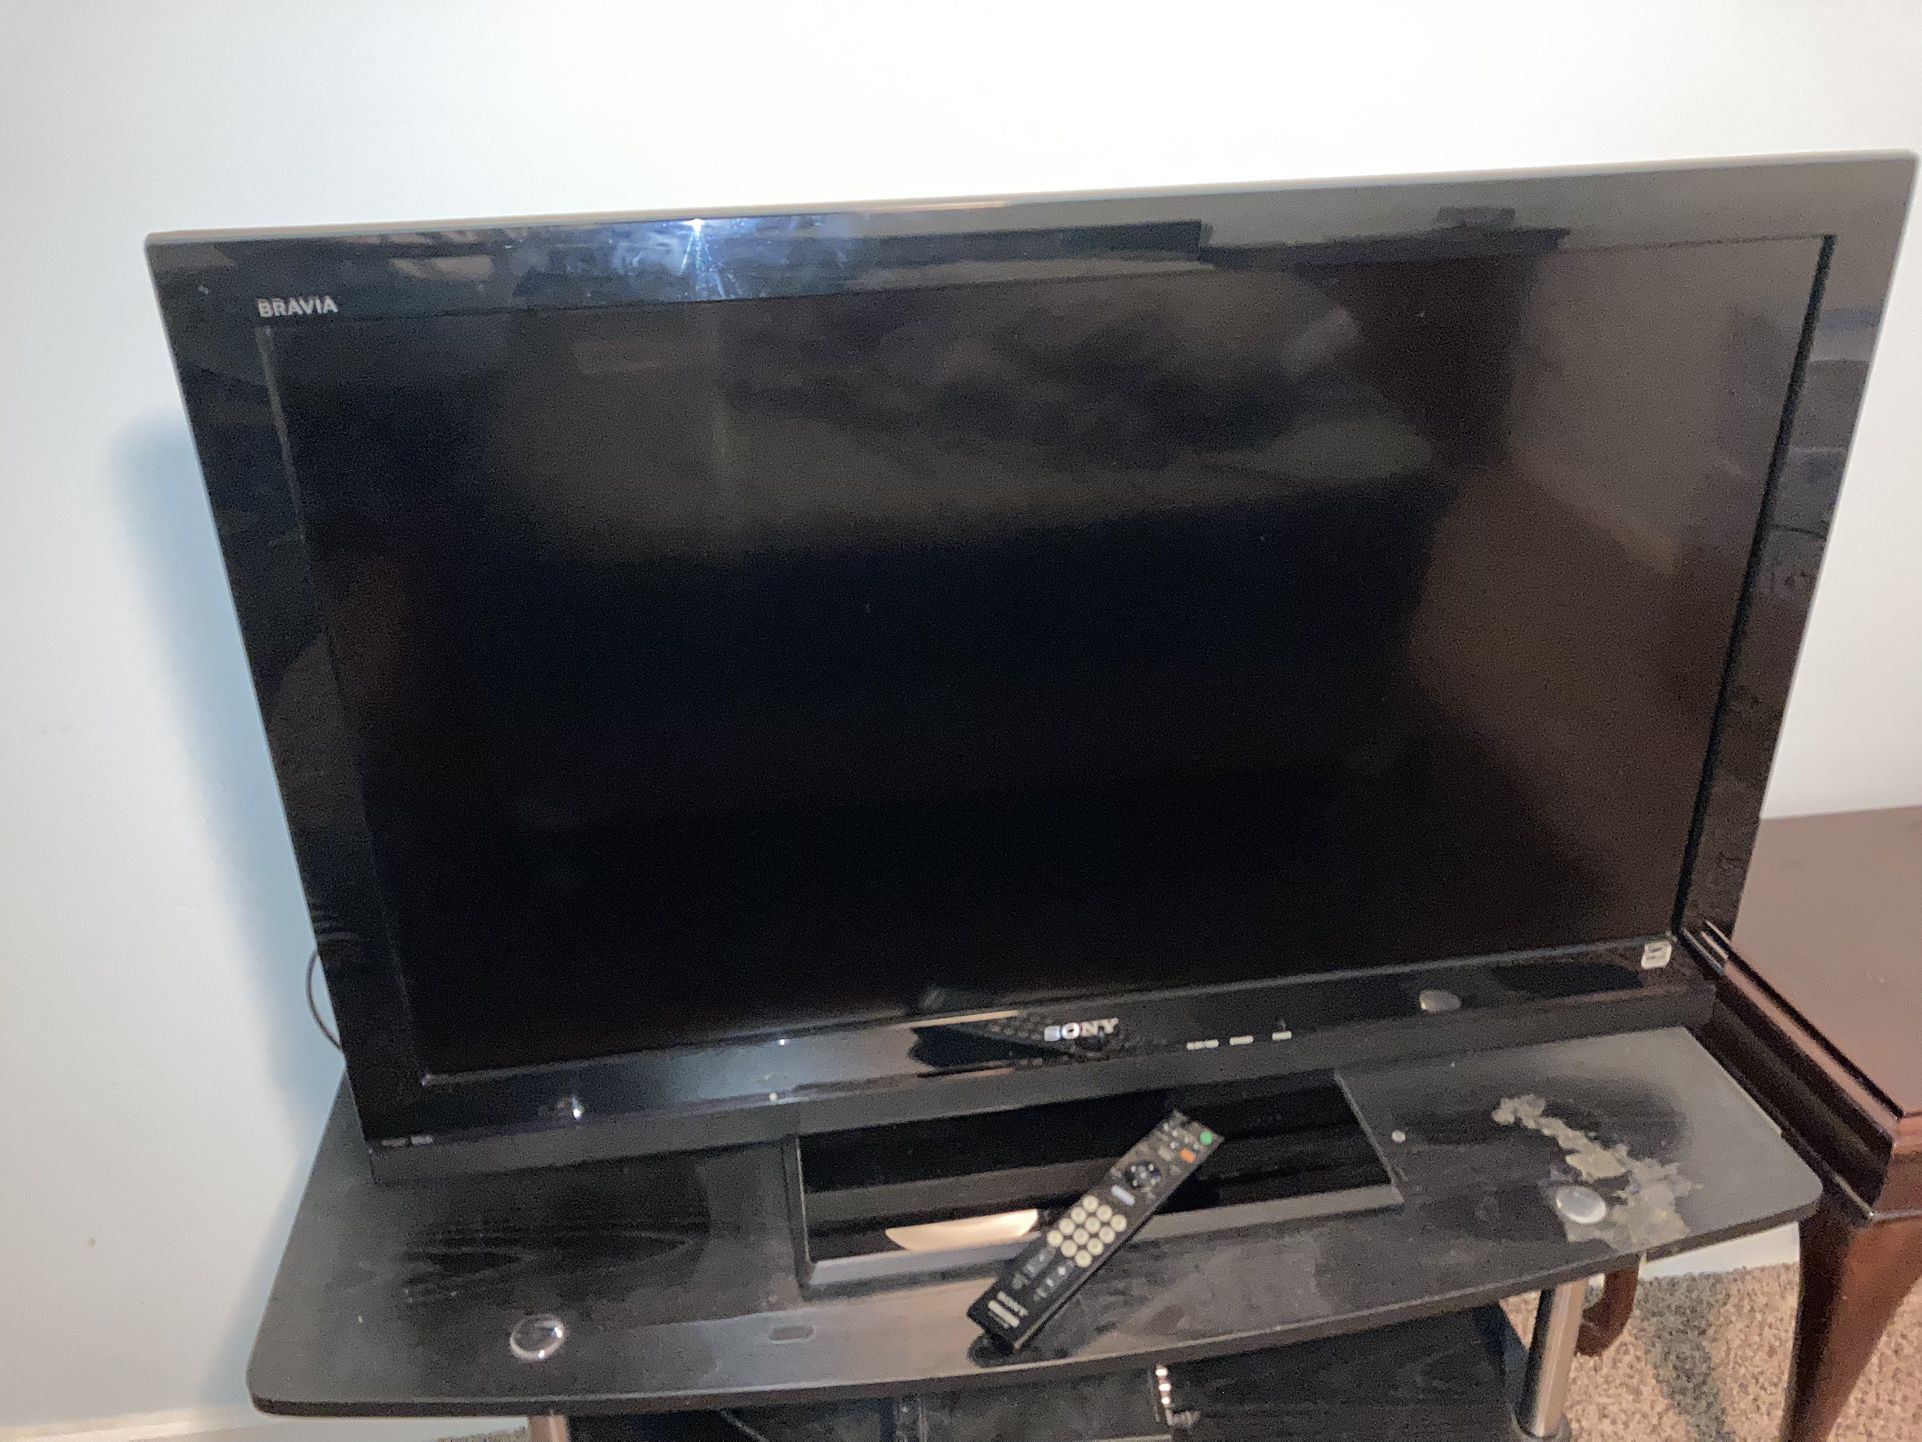 SONY 40” INCH TV HDTV TELEVISION WITH REMOTE KDL-40S5100